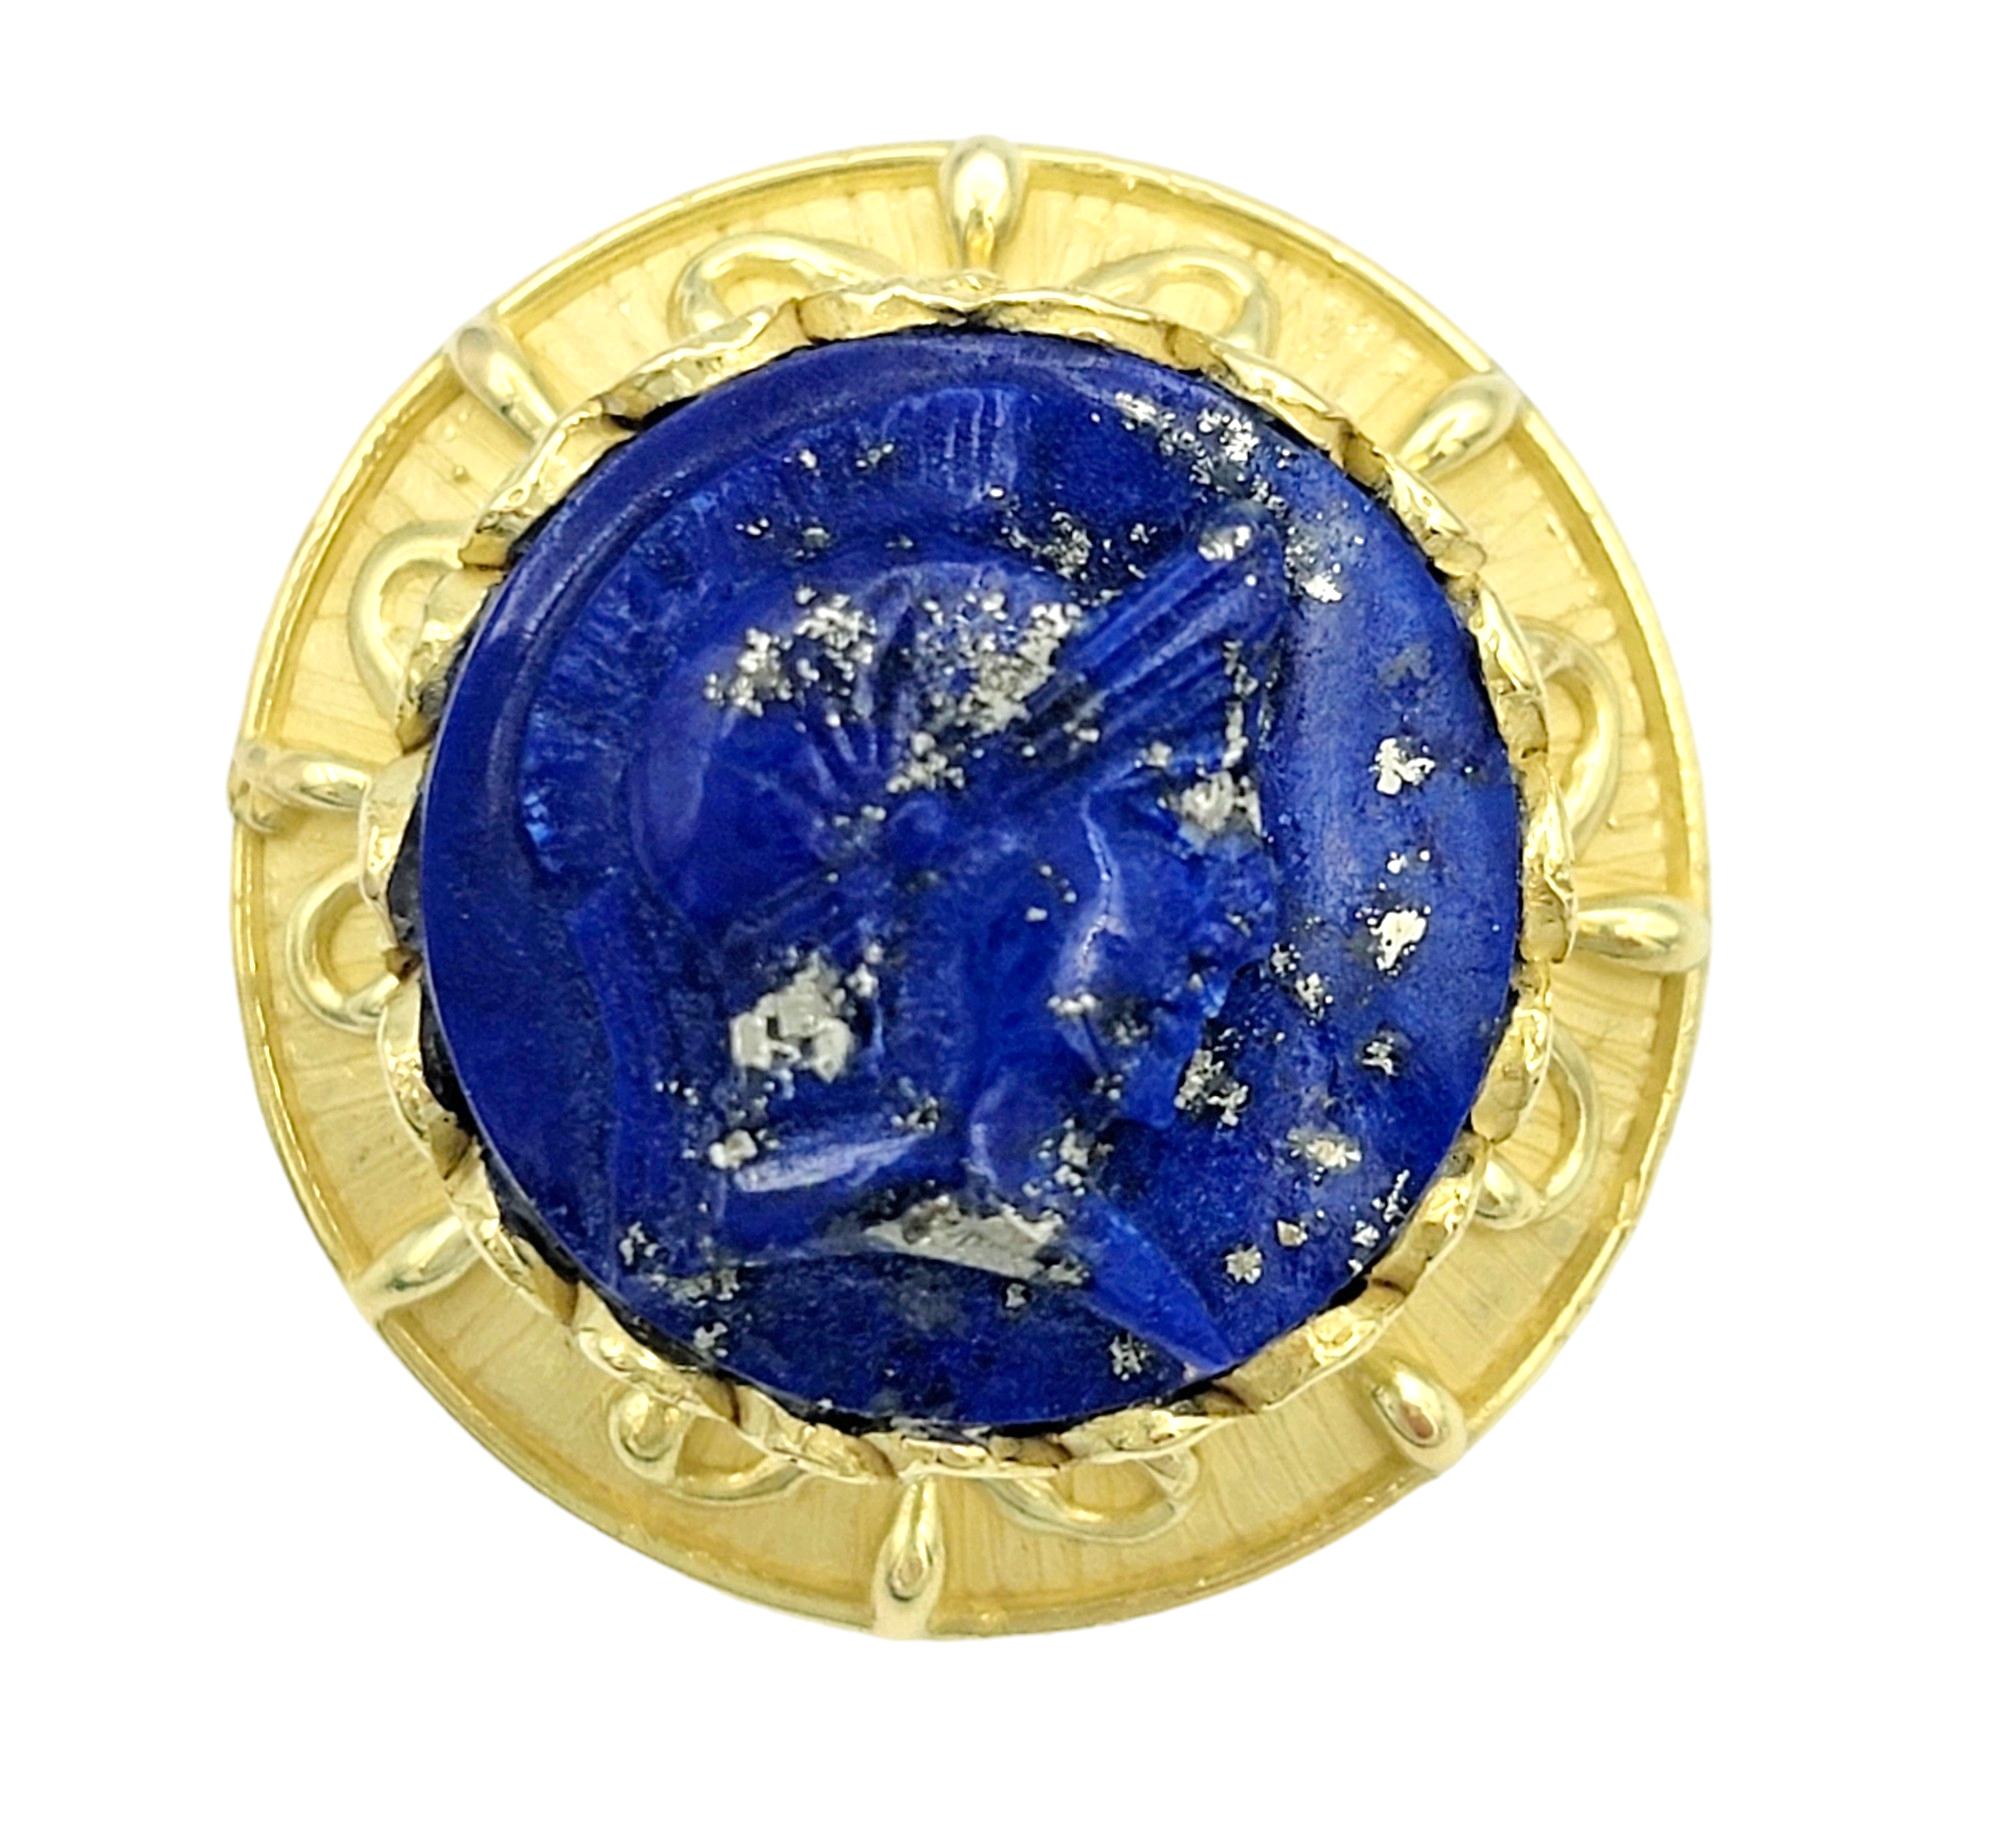 These striking stud earrings, set in radiant 18 karat yellow gold, are a testament to artistic craftsmanship and unique design. At their center, each earring features a lapis lazuli stone bearing a finely carved image of a Spartan warrior. The